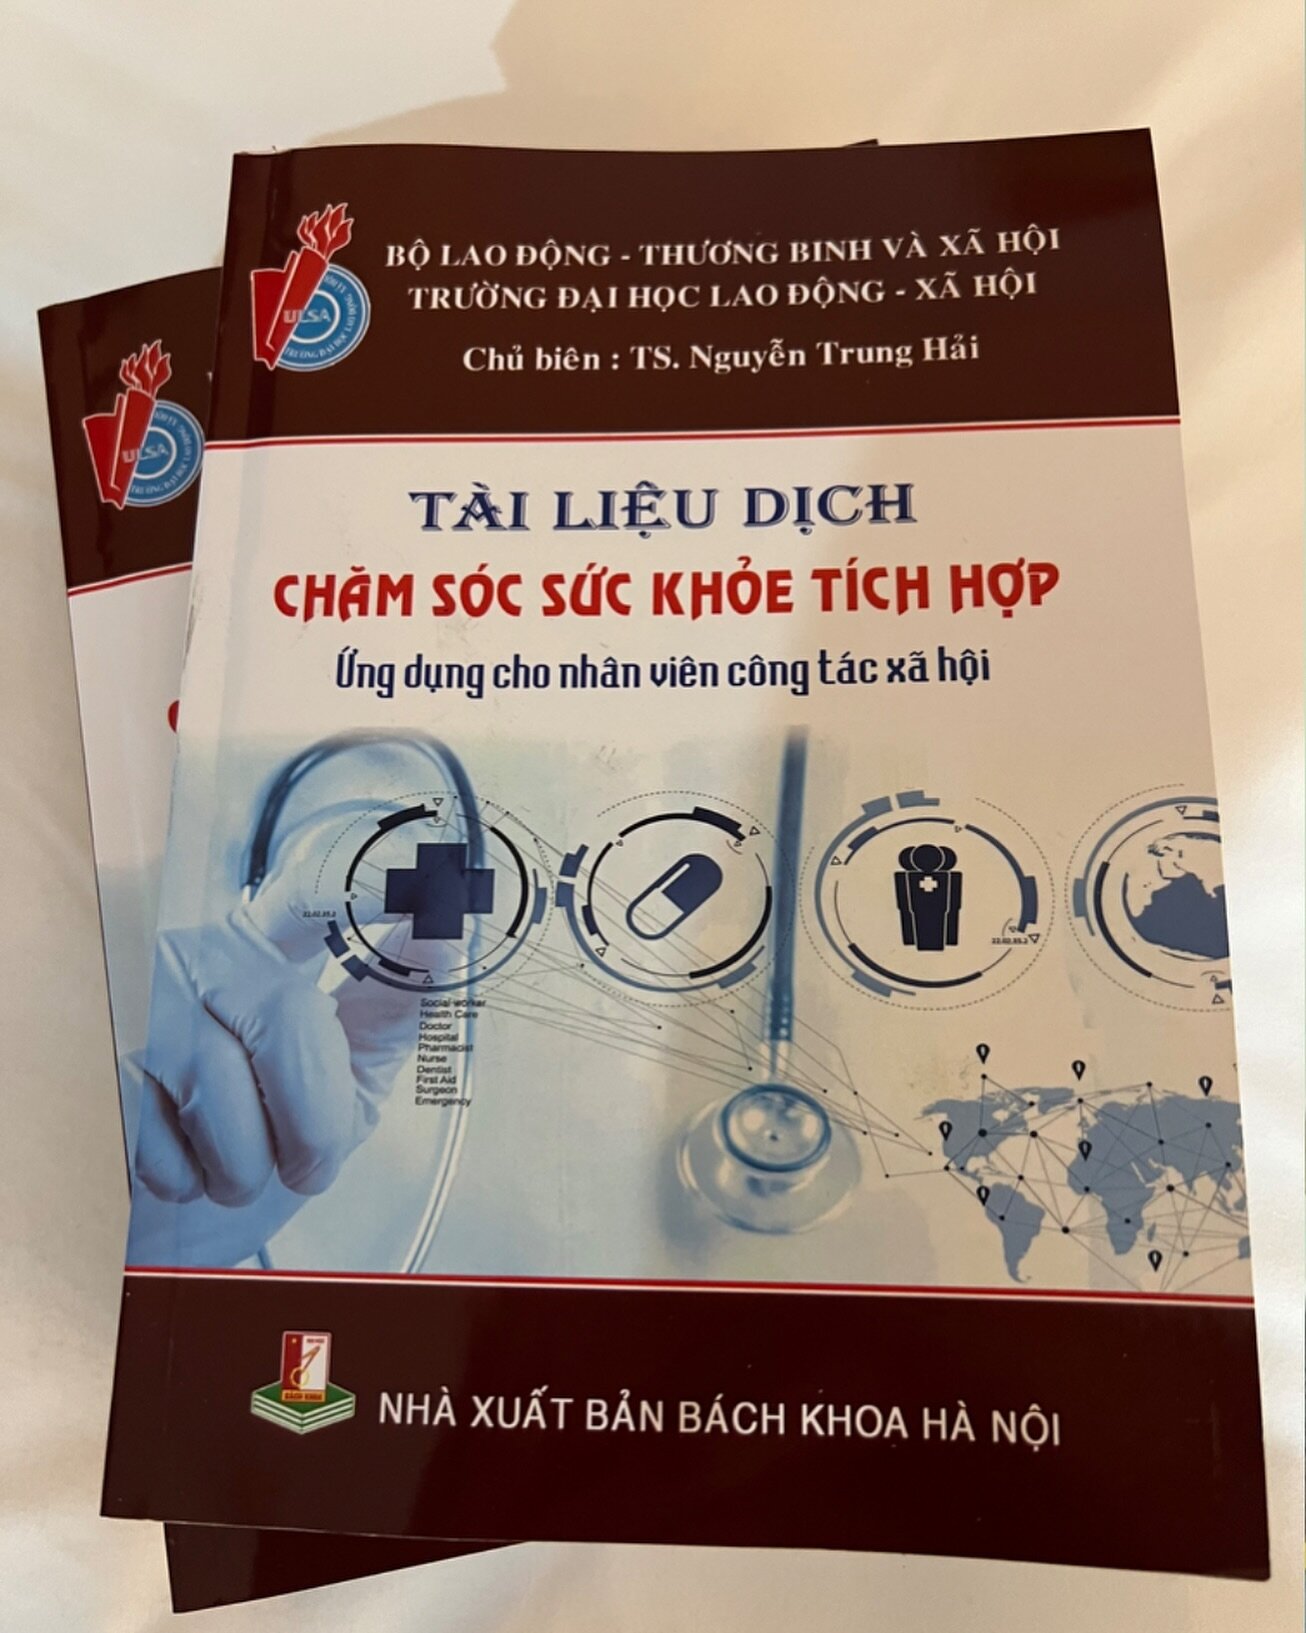 Very excited to announce that the textbook I co-authored with my colleagues has been translated and is currently being used in integrated care training for social workers in Vietnam! This is an immense honor! 🇻🇳❤️

#globalintegratedcare #integrated